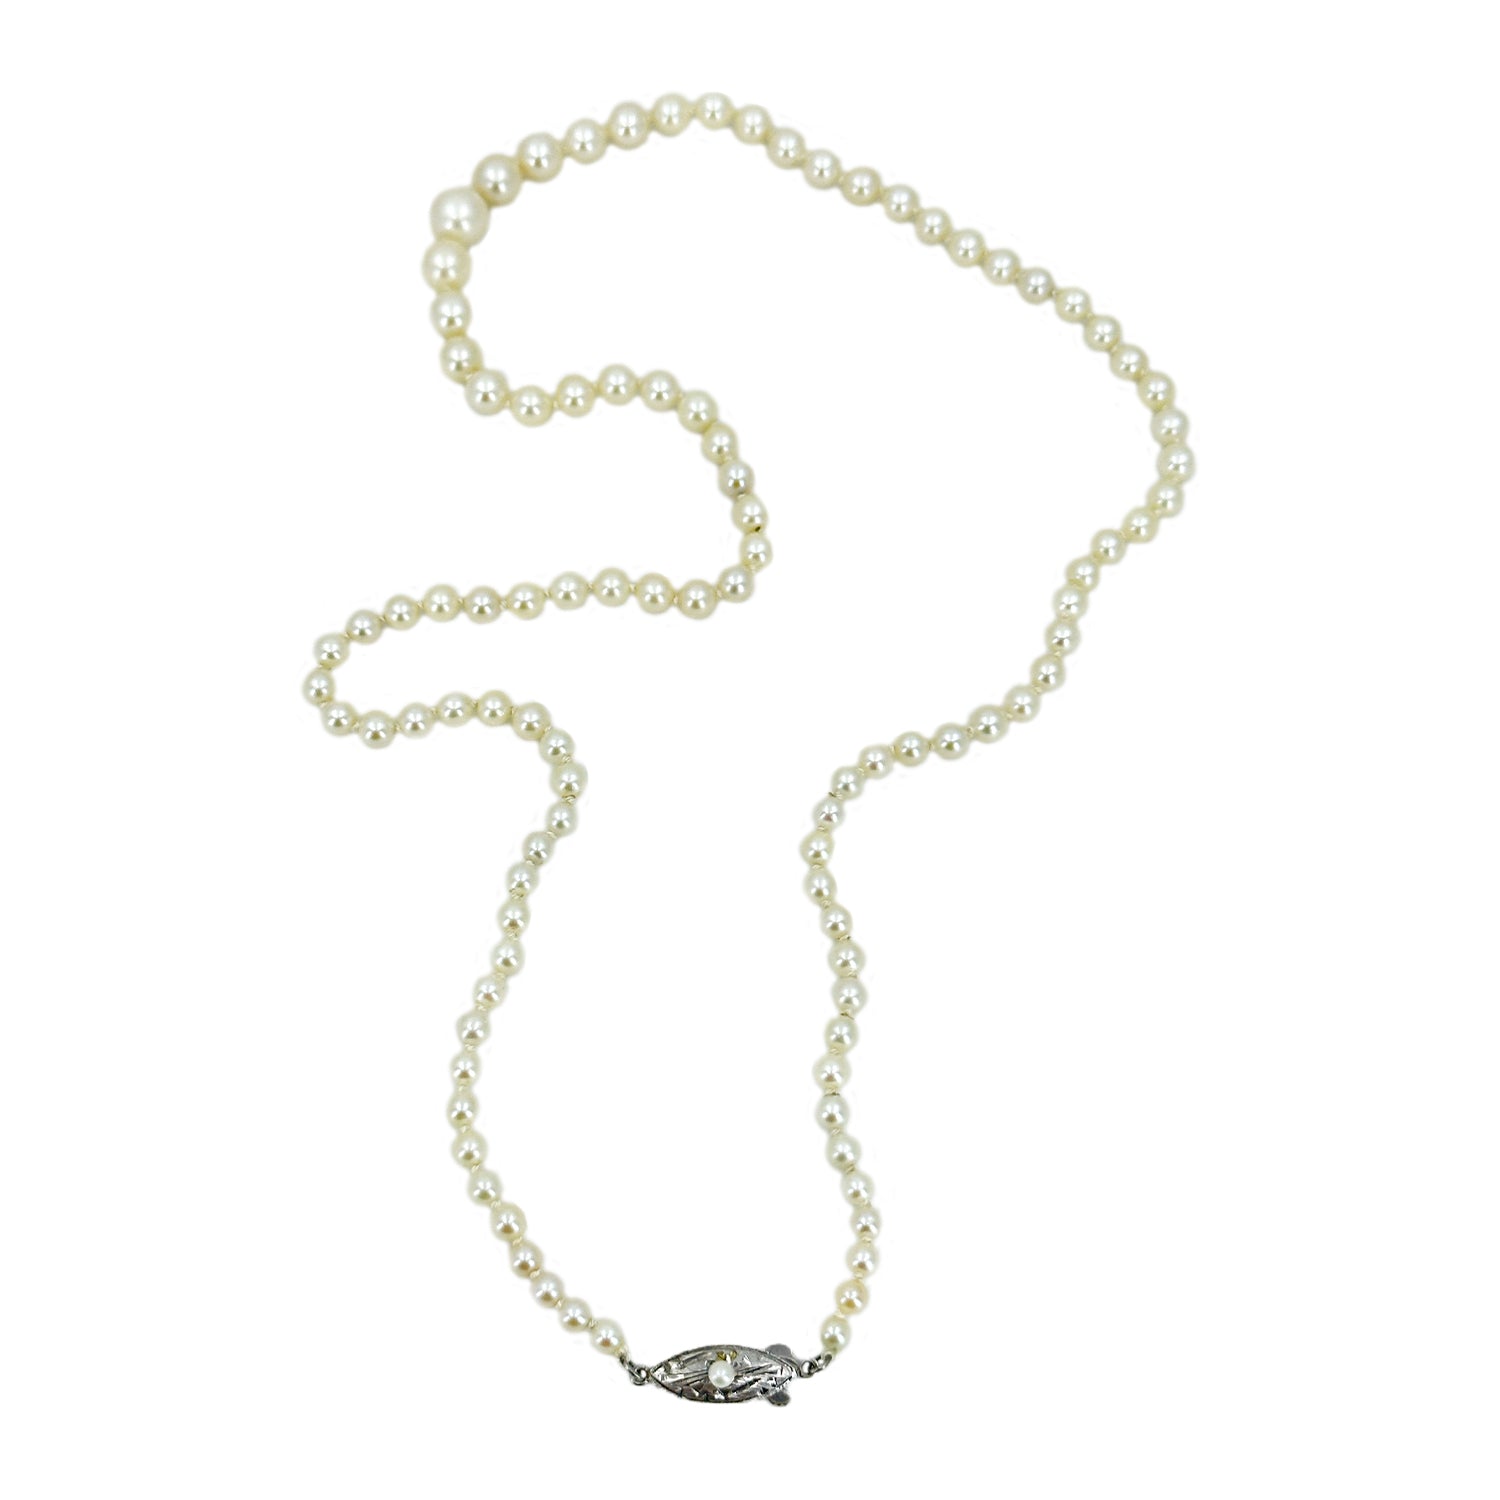 Quality Art Deco Graduated Japanese Saltwater Cultured Akoya Pearl Vintage Necklace - Sterling Silver 20.25 Inch